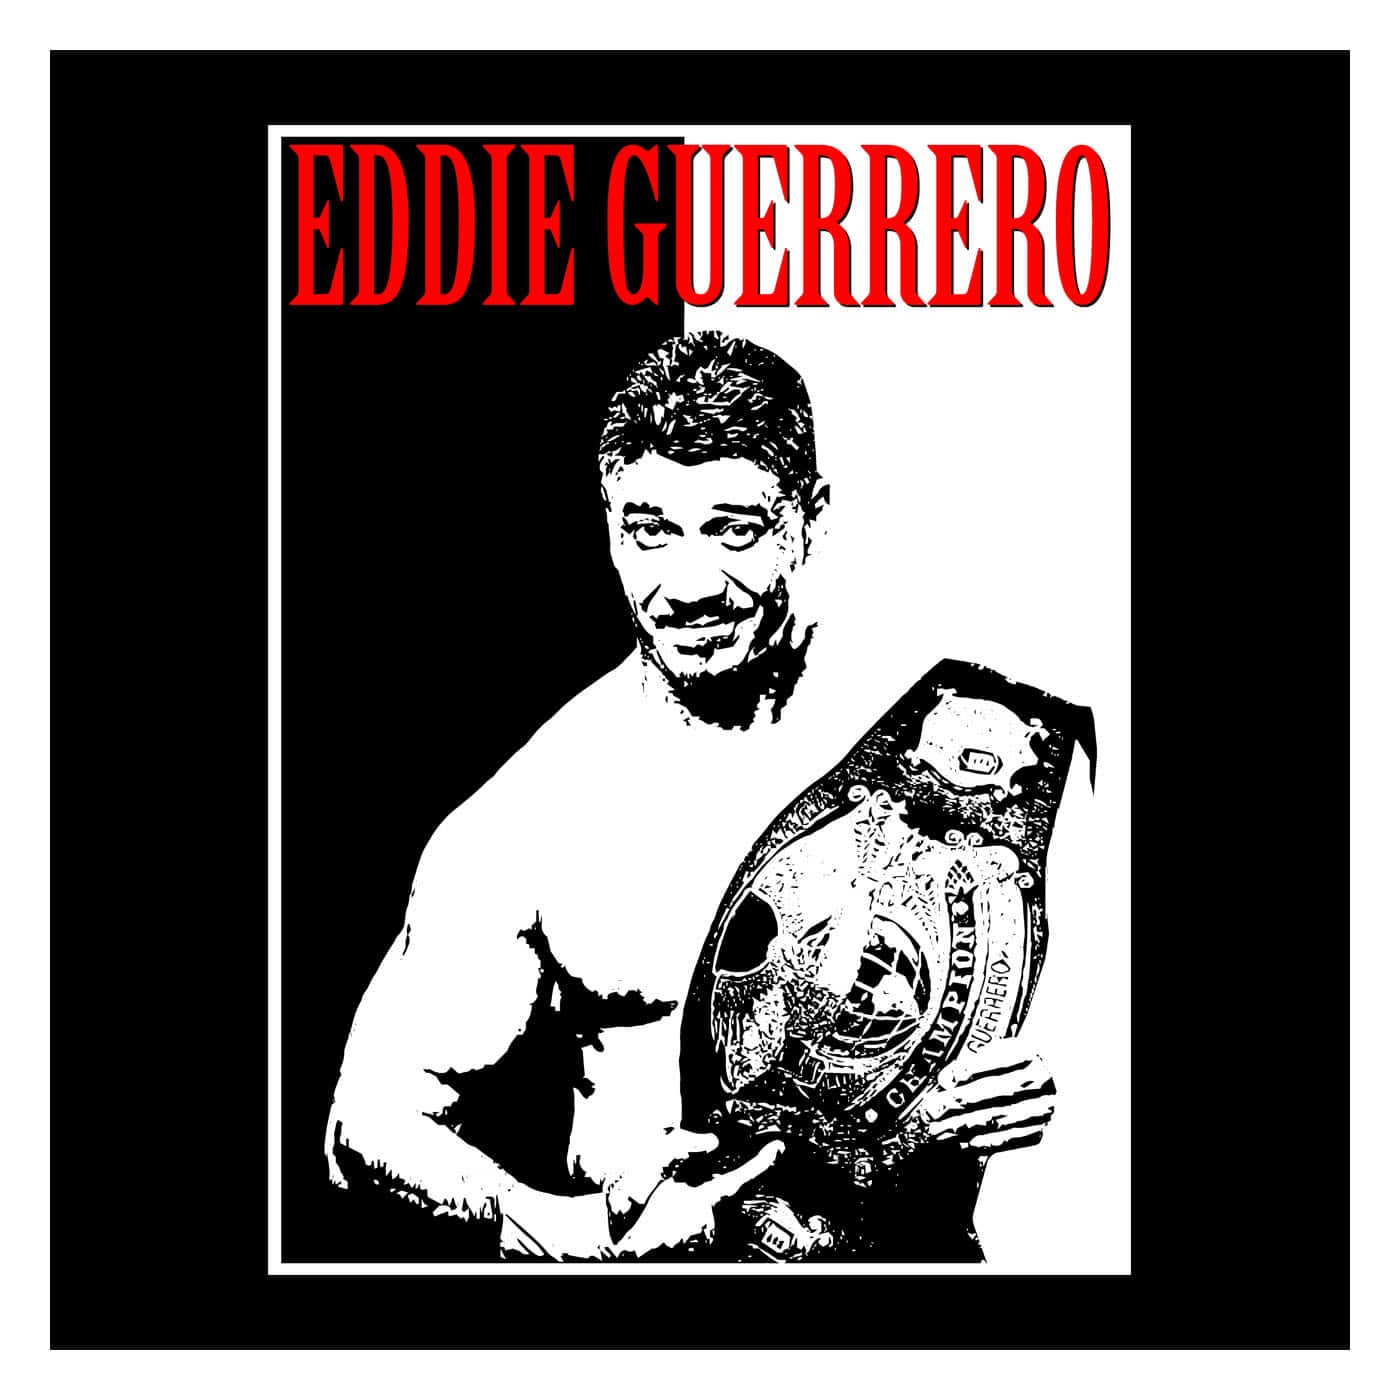 Black And White Scarface Poster Eddie Guerrero Wallpaper